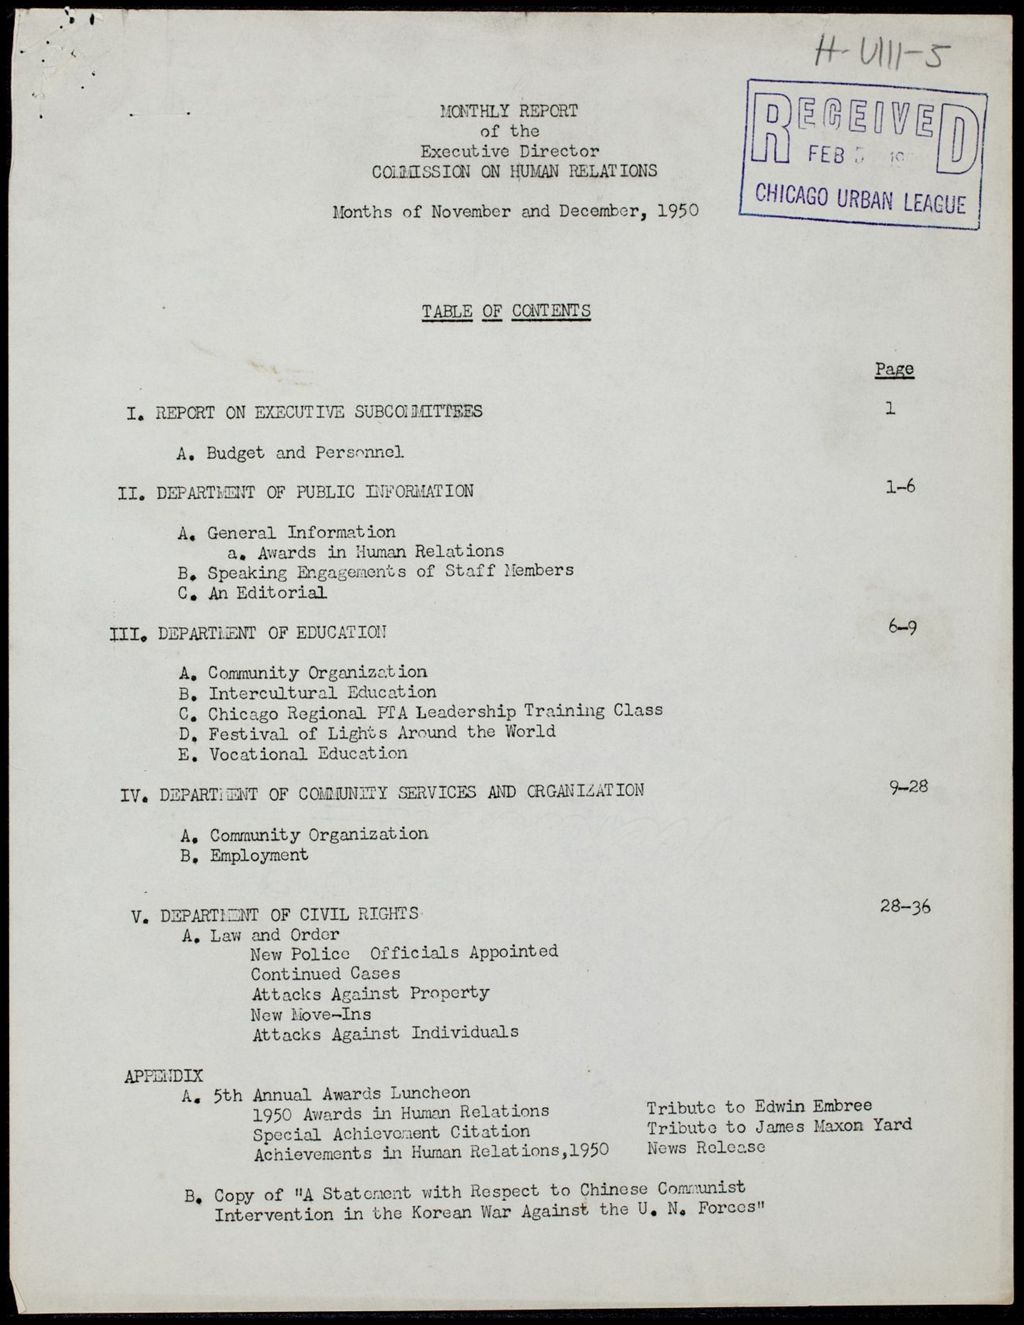 Miniature of Chicago Commission on Human Relations Executive Director reports, 1950 (Folder I-2790)